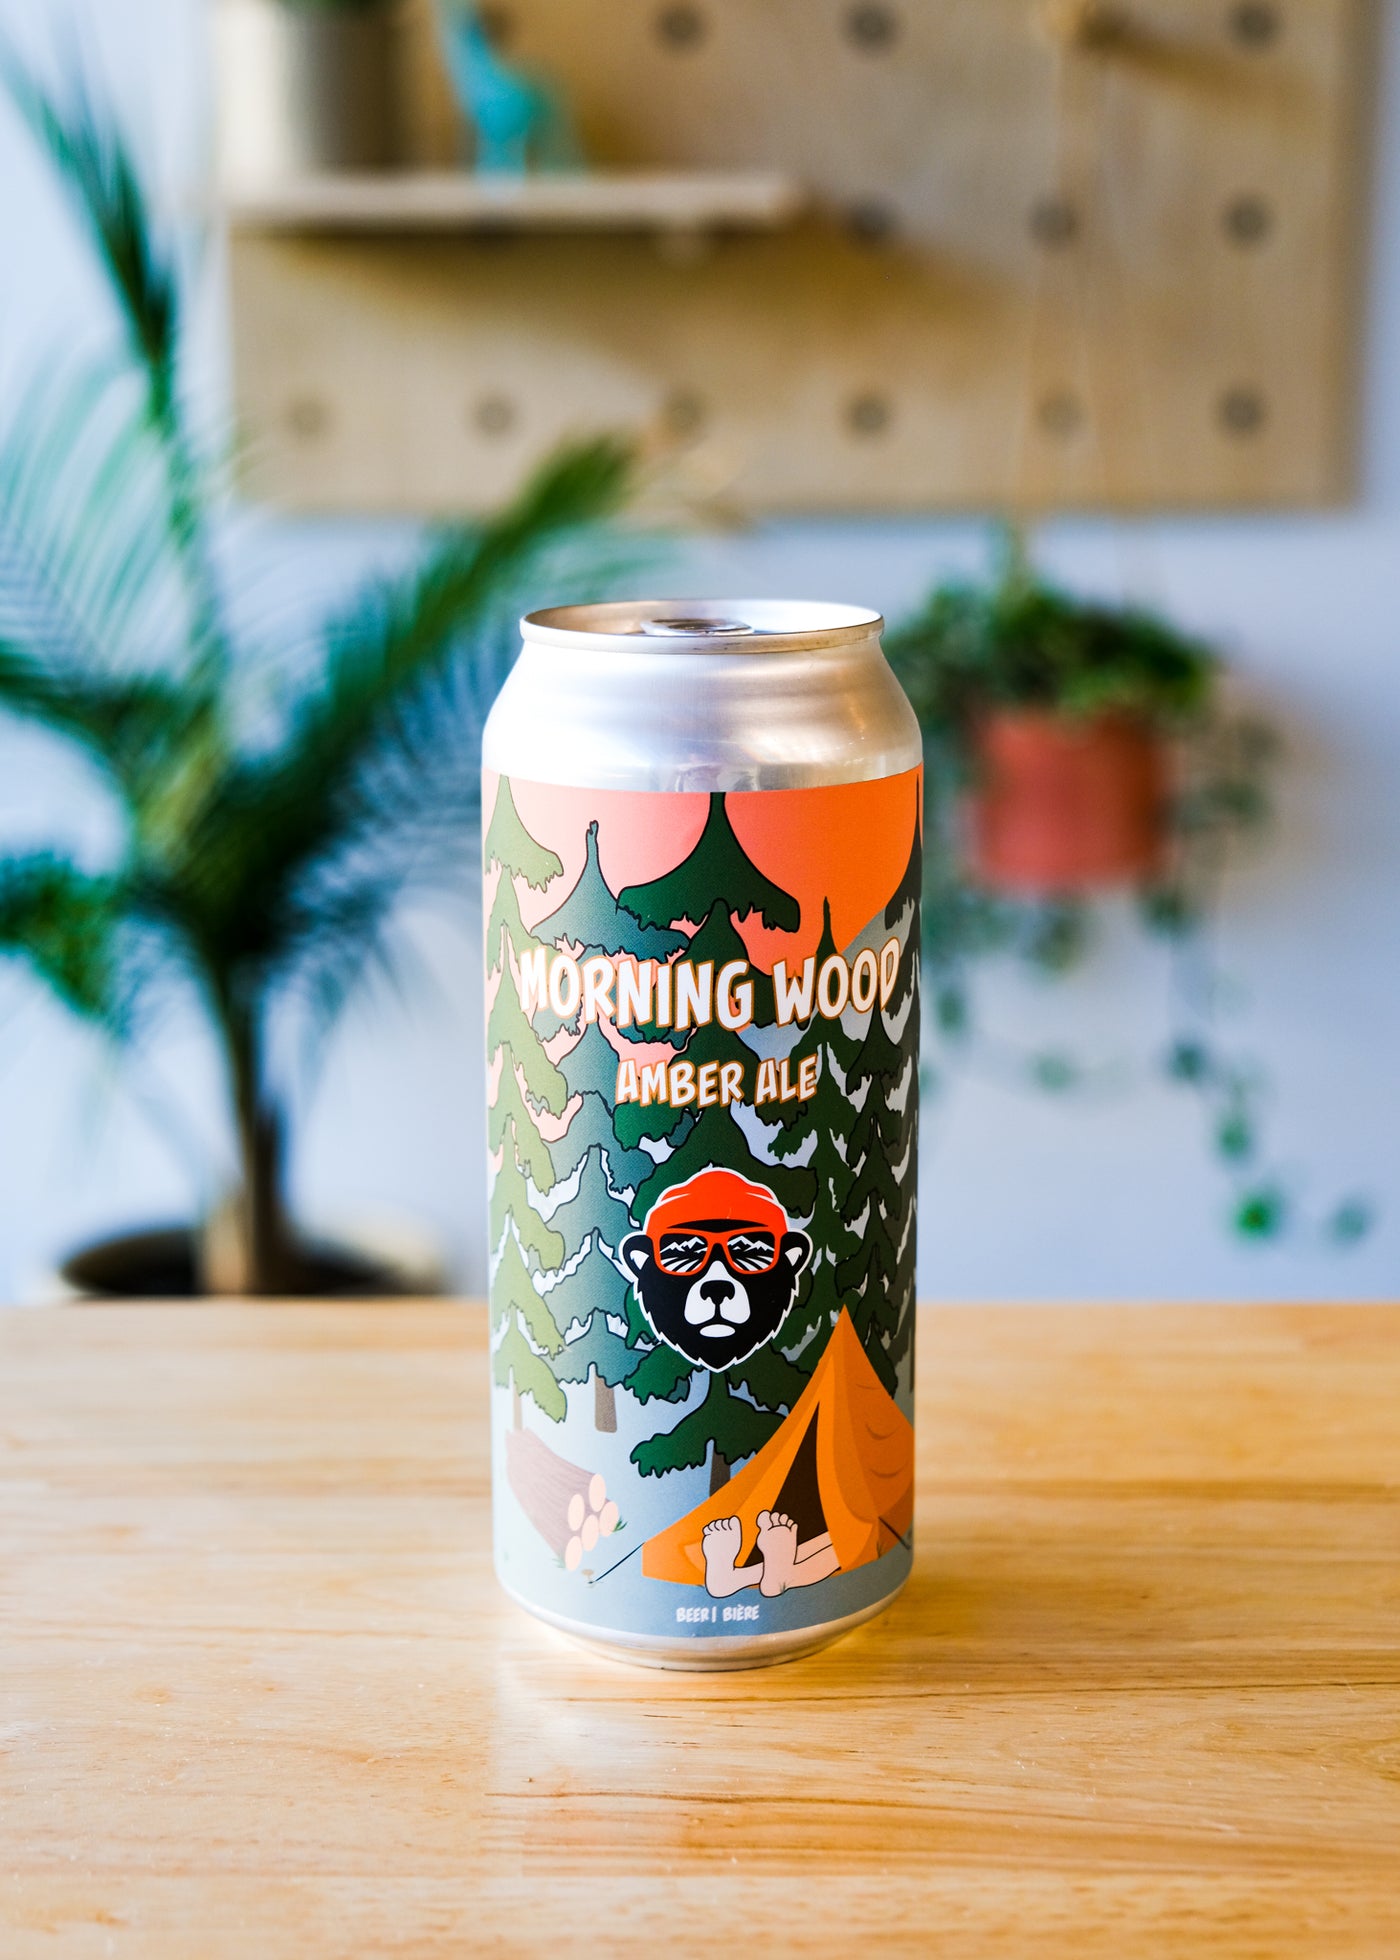 MORNING WOOD | Amber Ale